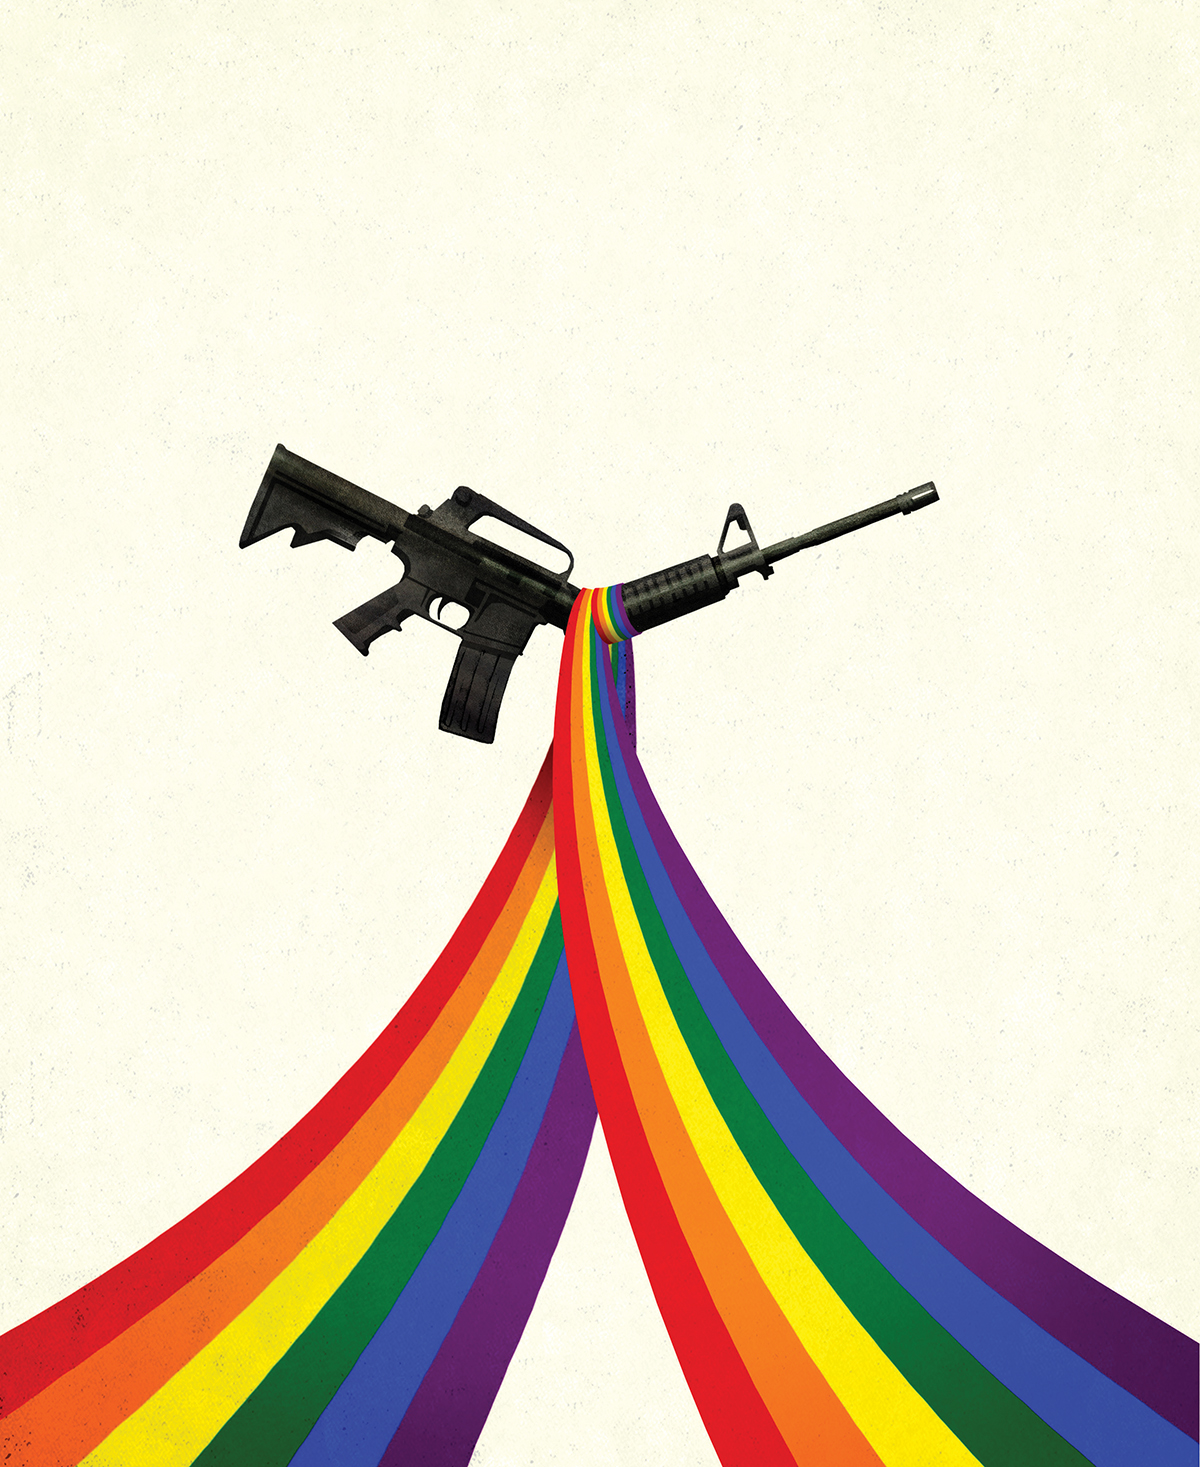 After Orlando, the LGBT community is read to take on its next political cause: gun control.